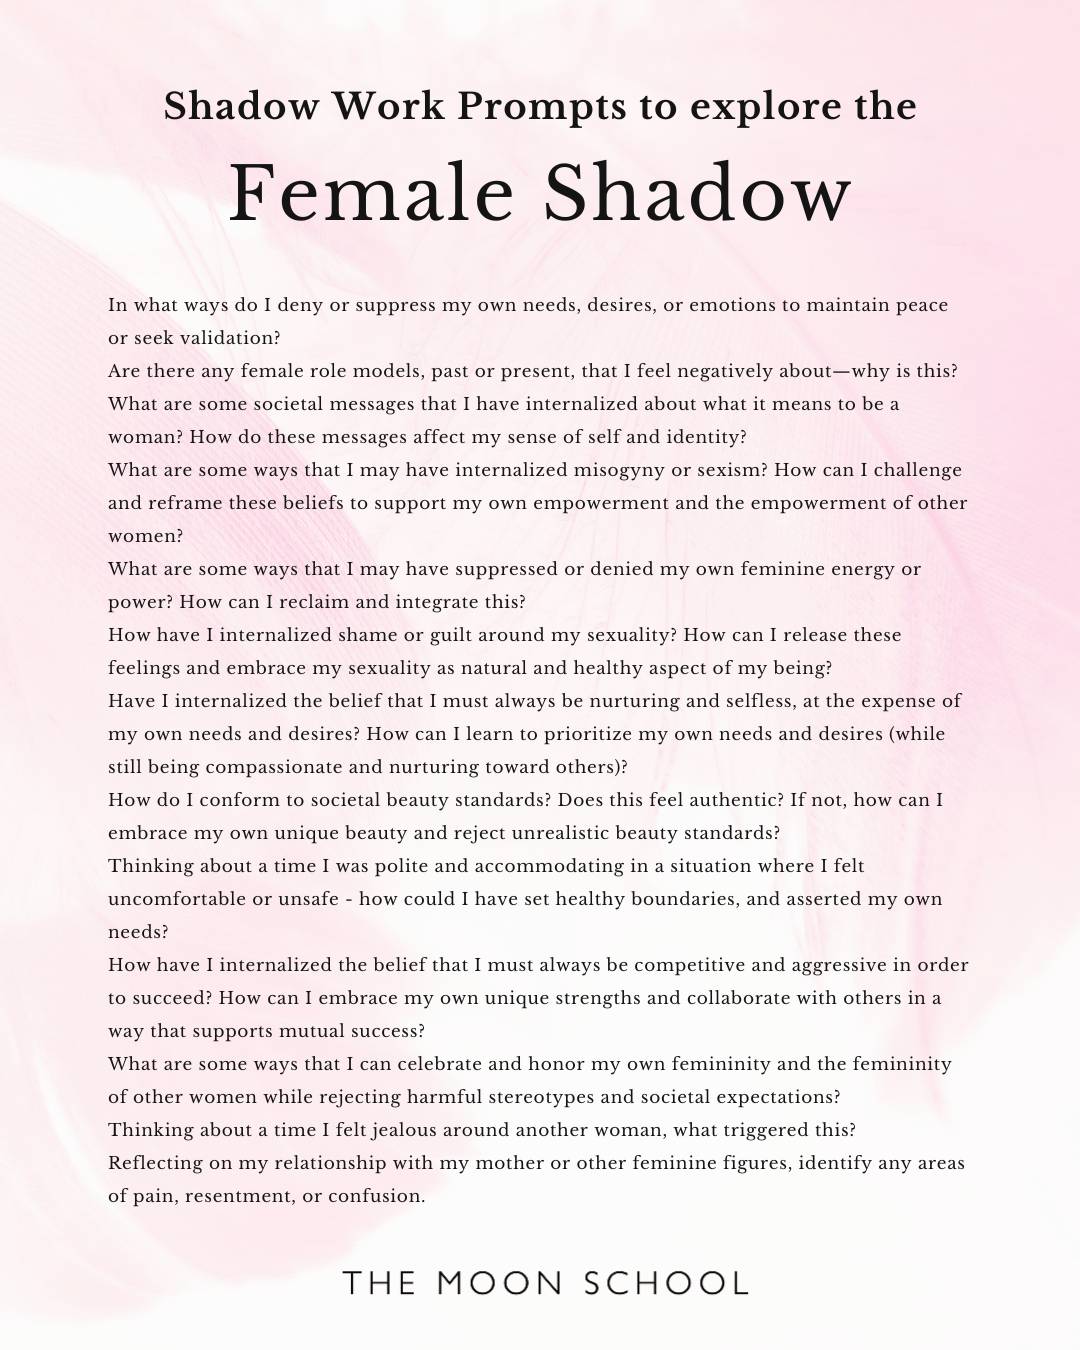 list of shadow work prompts for the feminine shadow